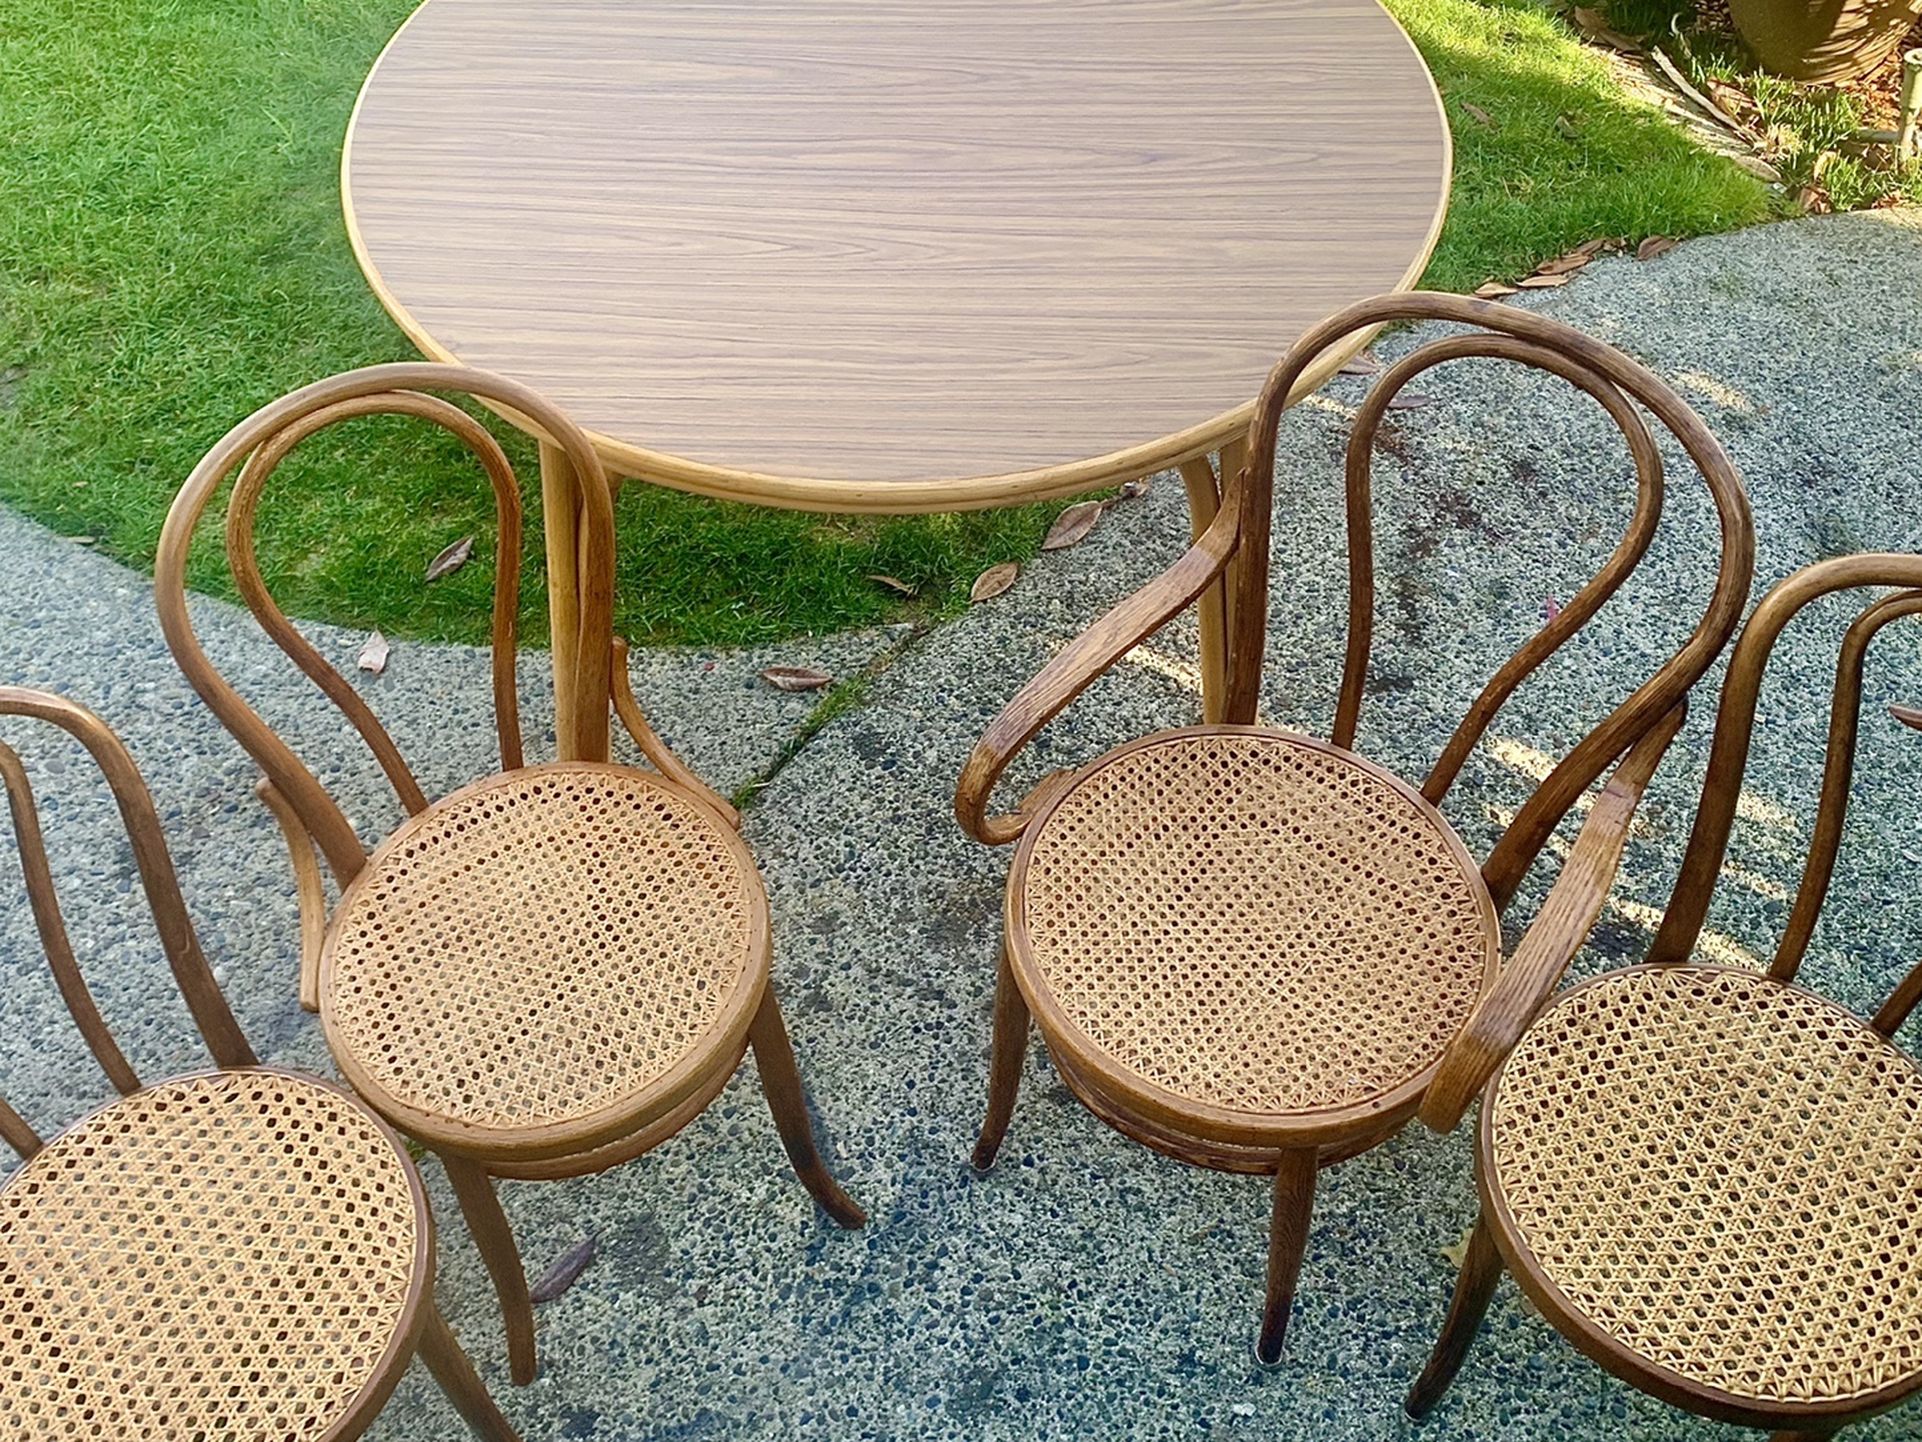 PRICED TO SELL VINTAGE BENTWOOD & RATTAN DINING SET!!!!